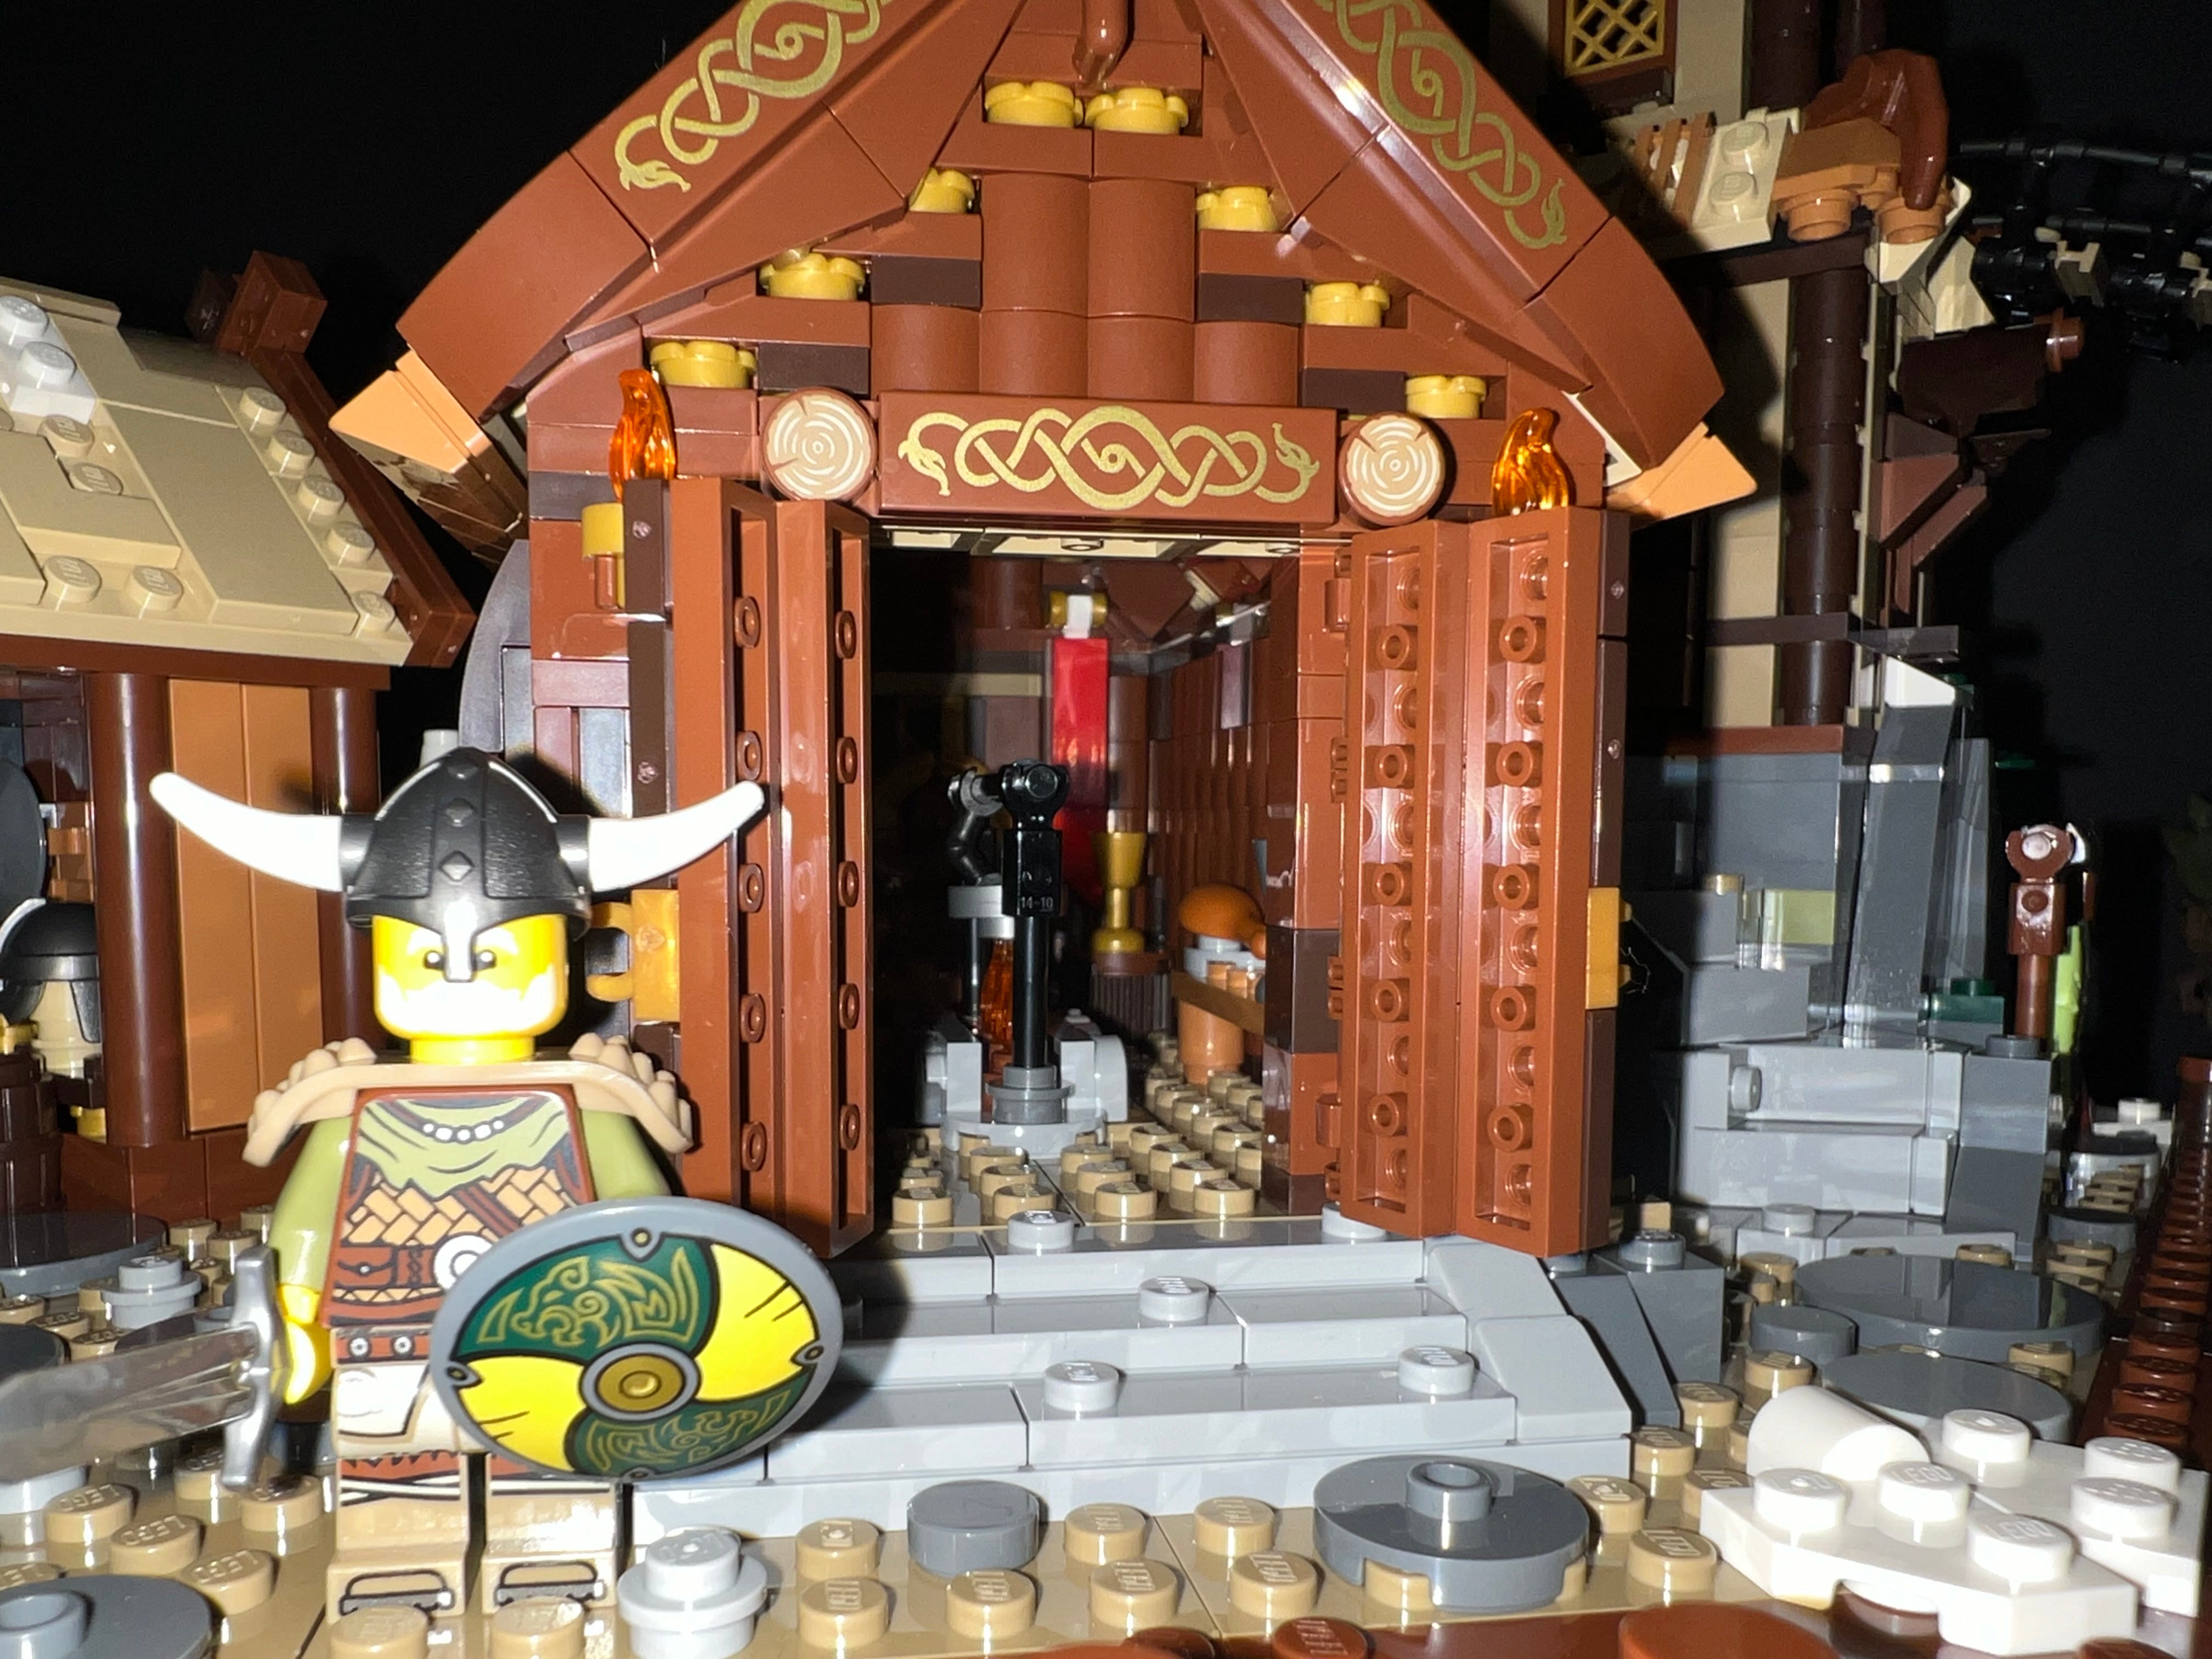 LEGO Gets Viking History Wrong, But Who Cares At This Price?, by Attila  Vágó, Bricks n' Brackets